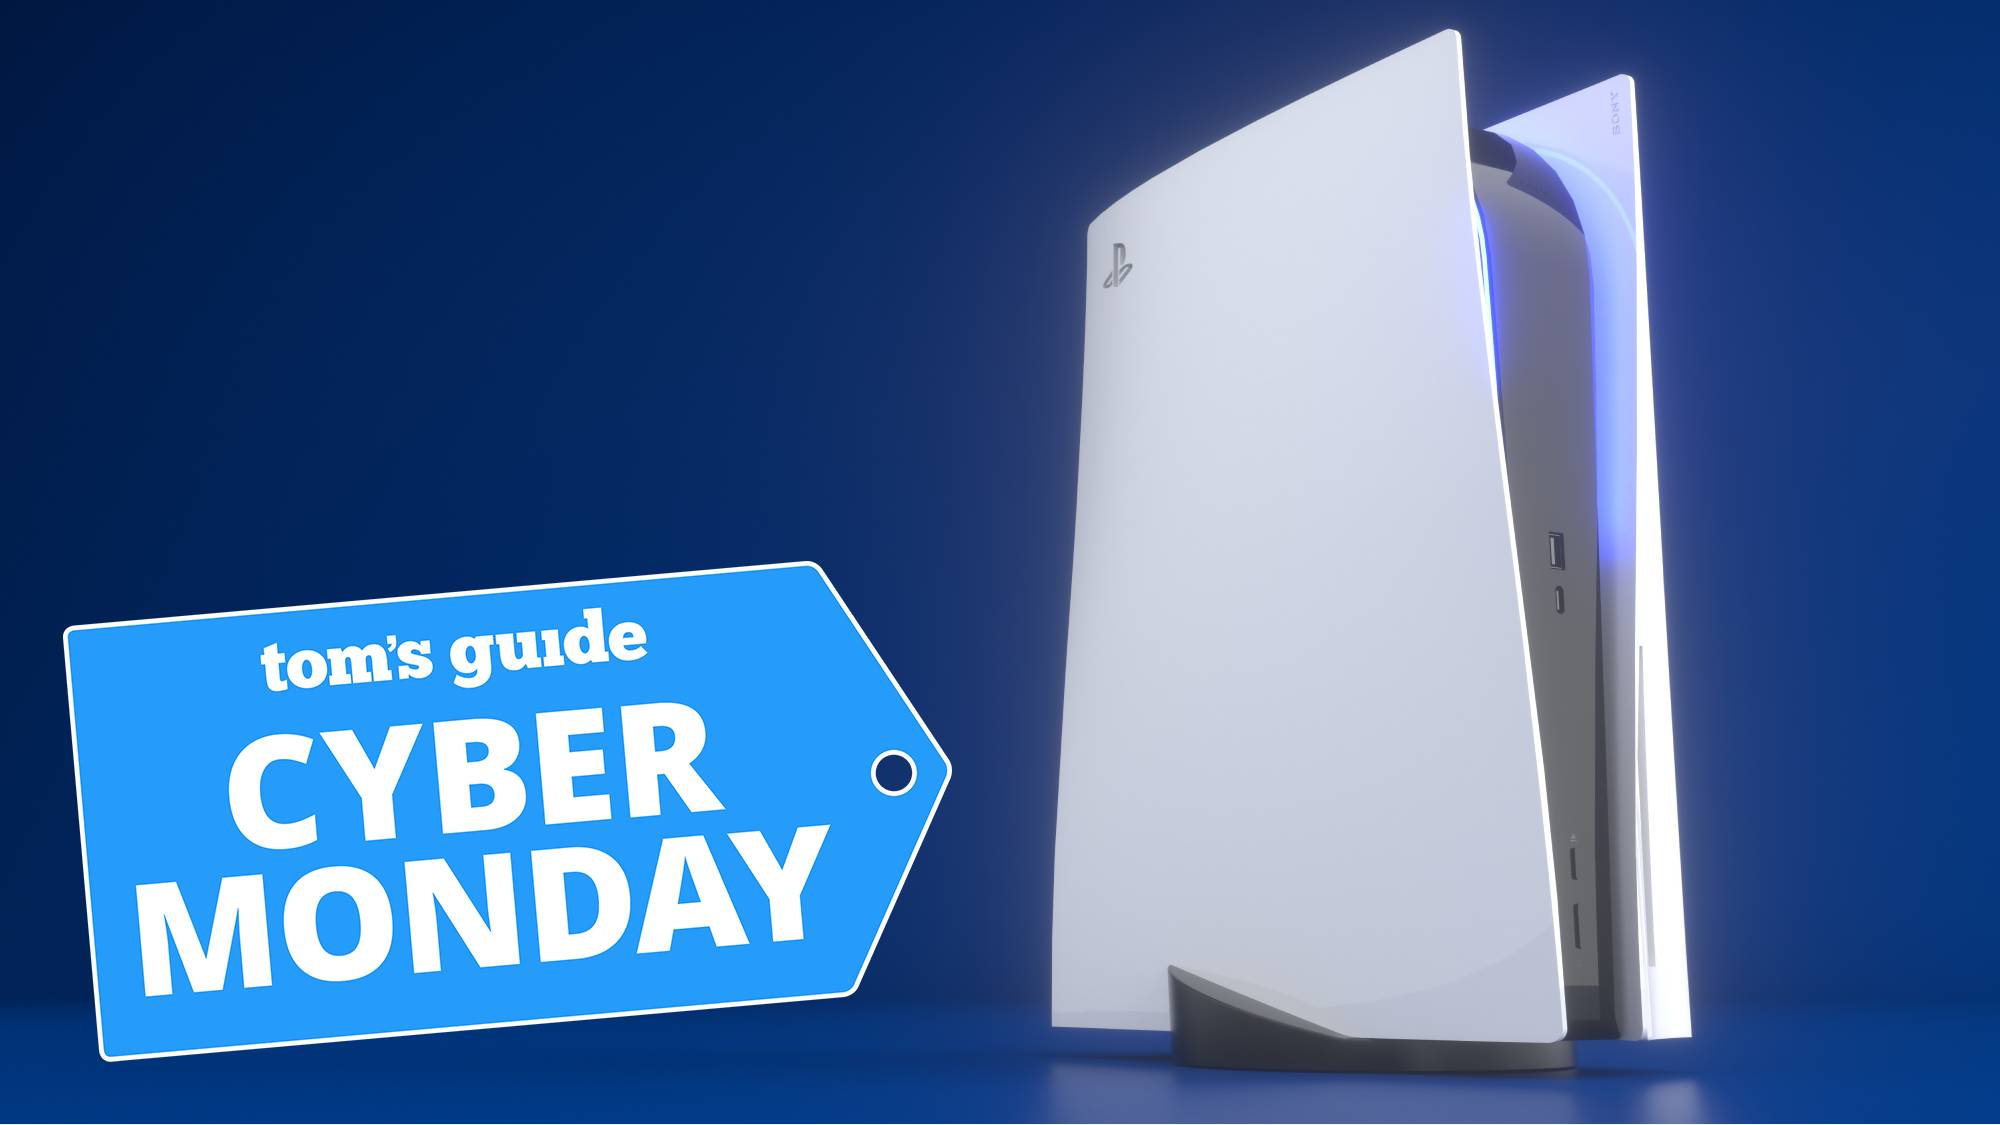 PS5 with a cyber Monday deal tag